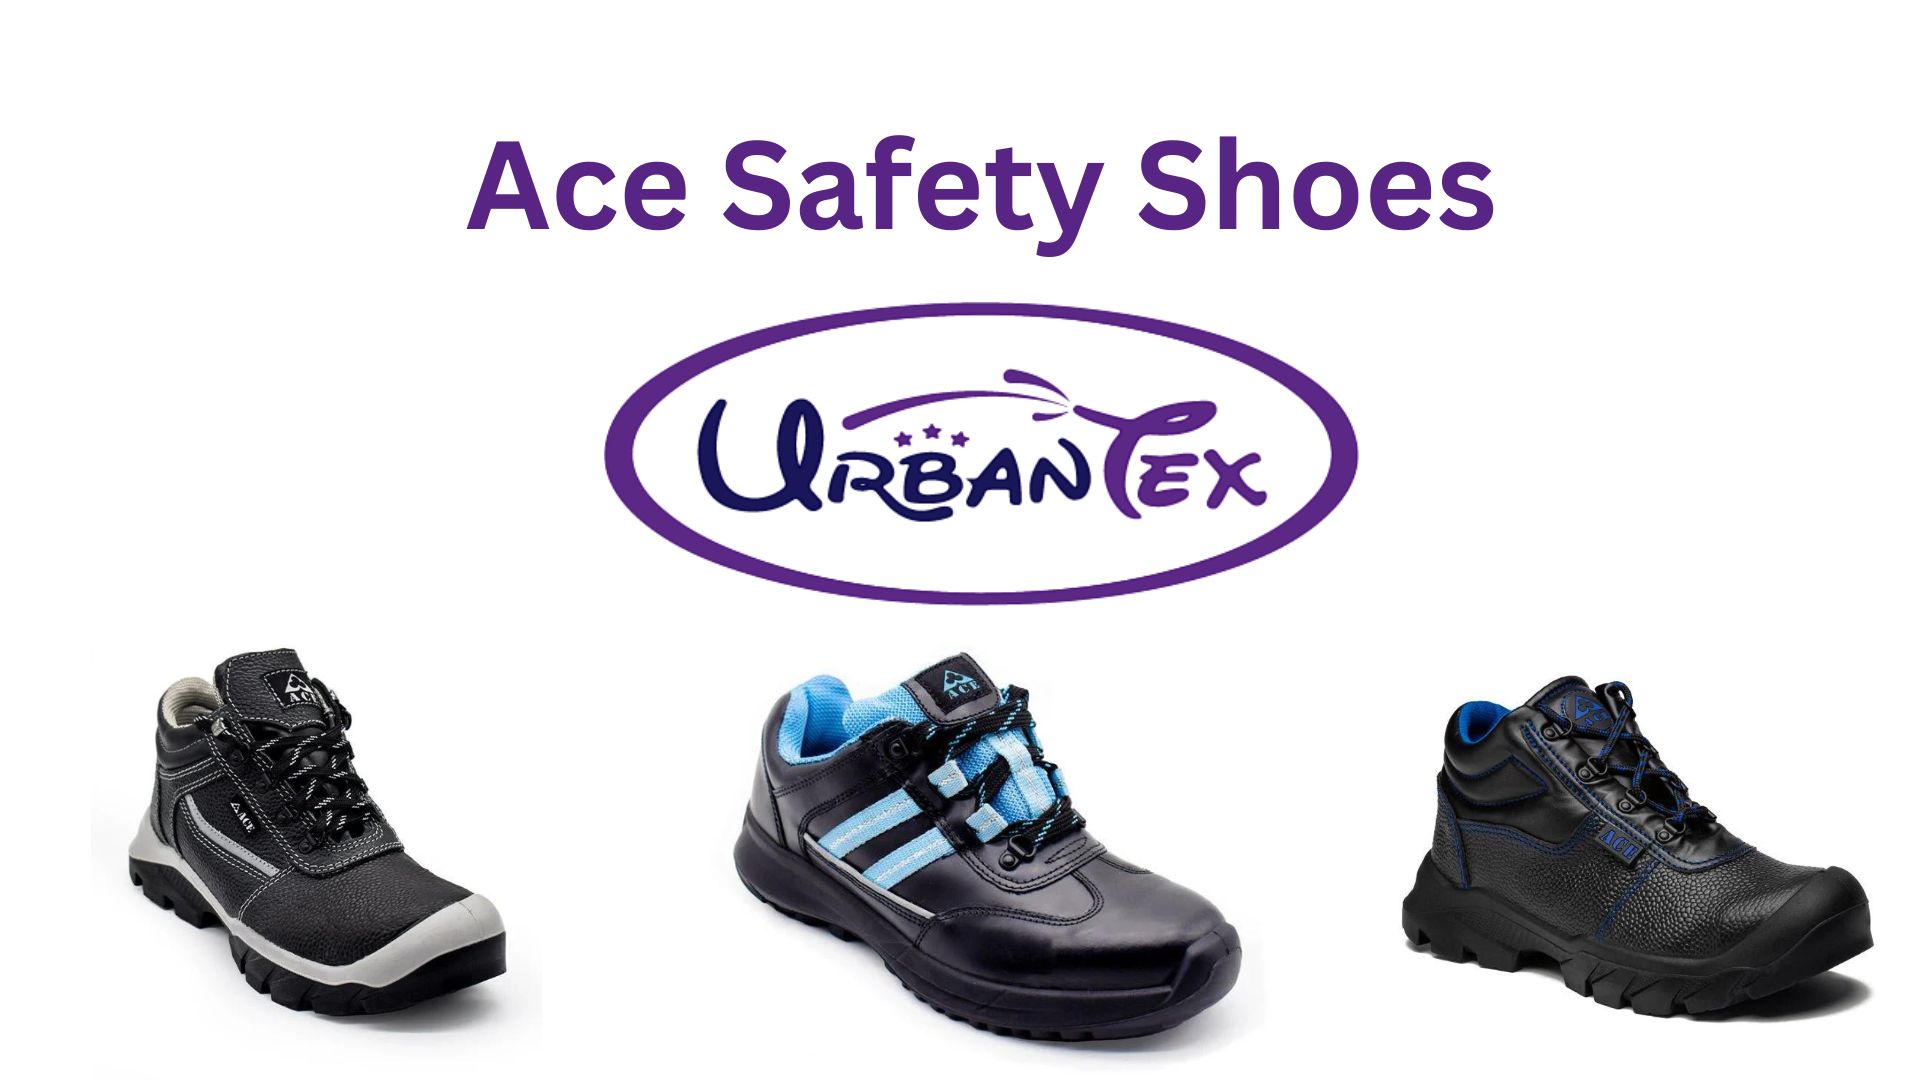 ACE Safety Shoes: Why it is the best work shoe for your profession